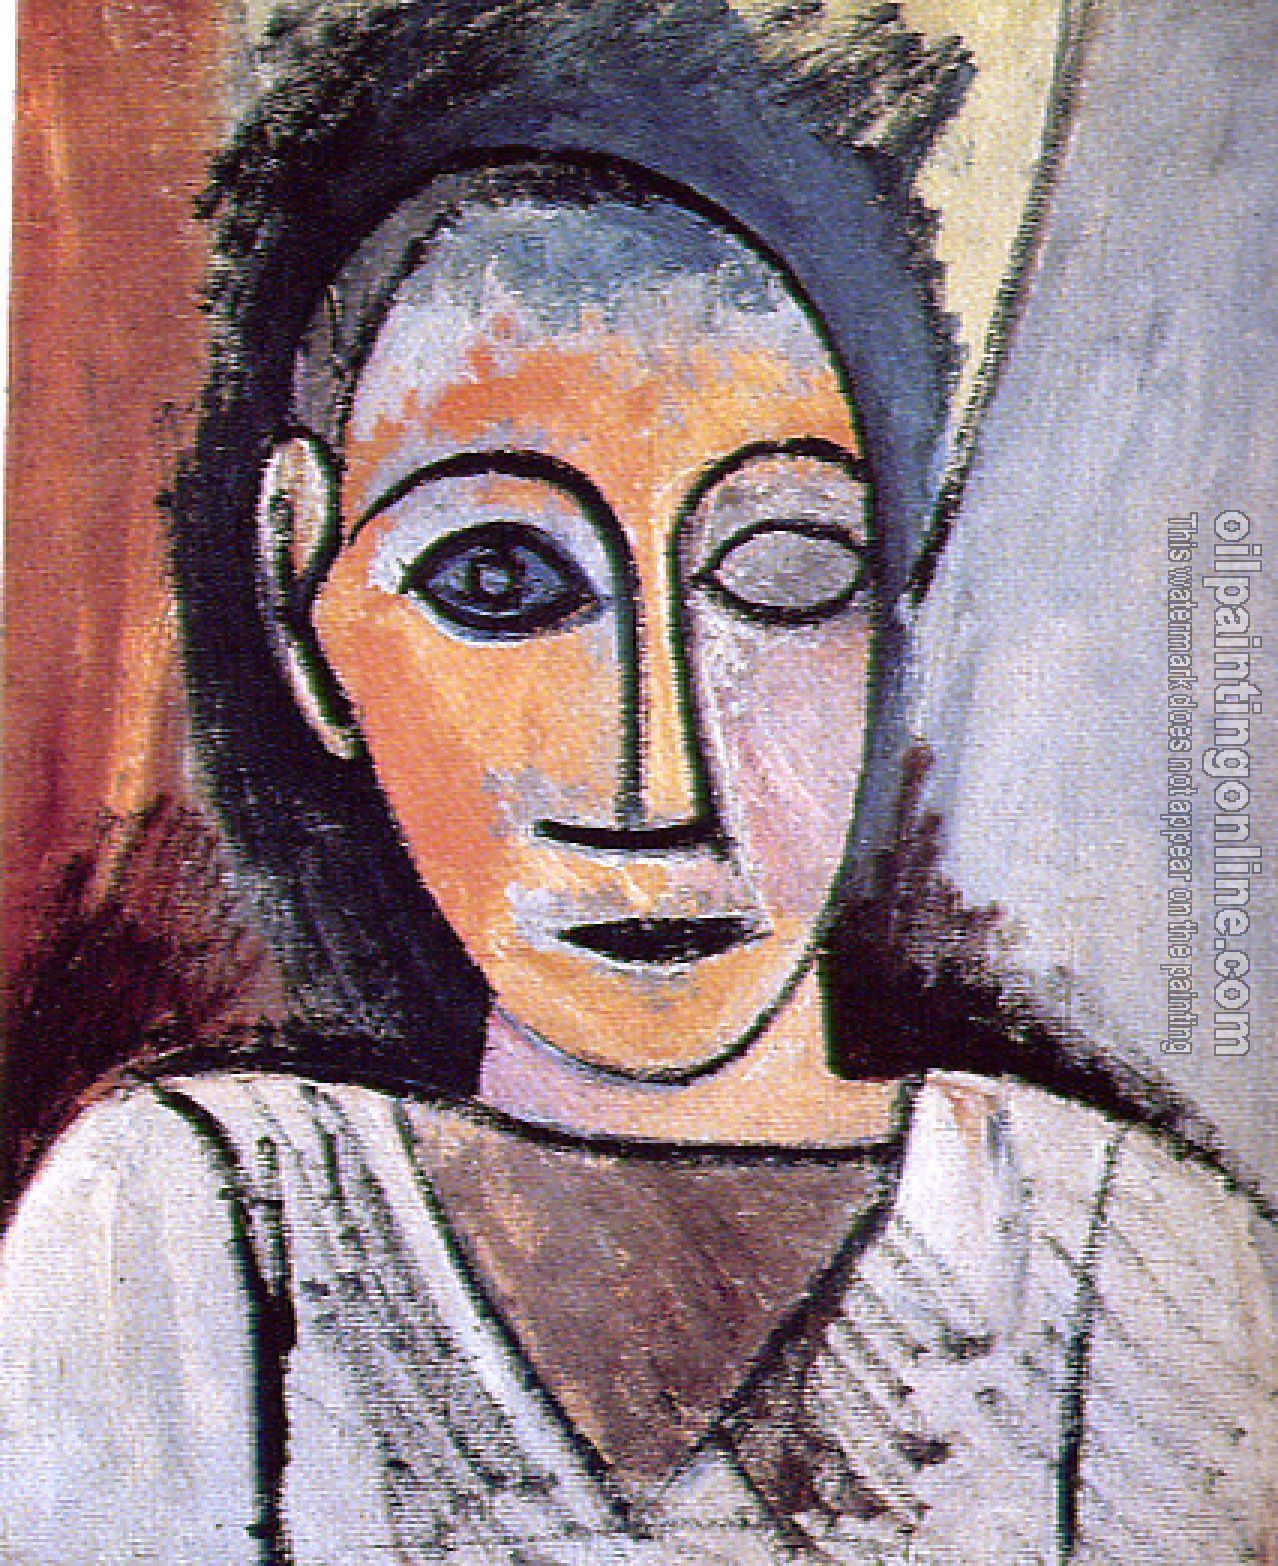 Picasso, Pablo - bust of a man